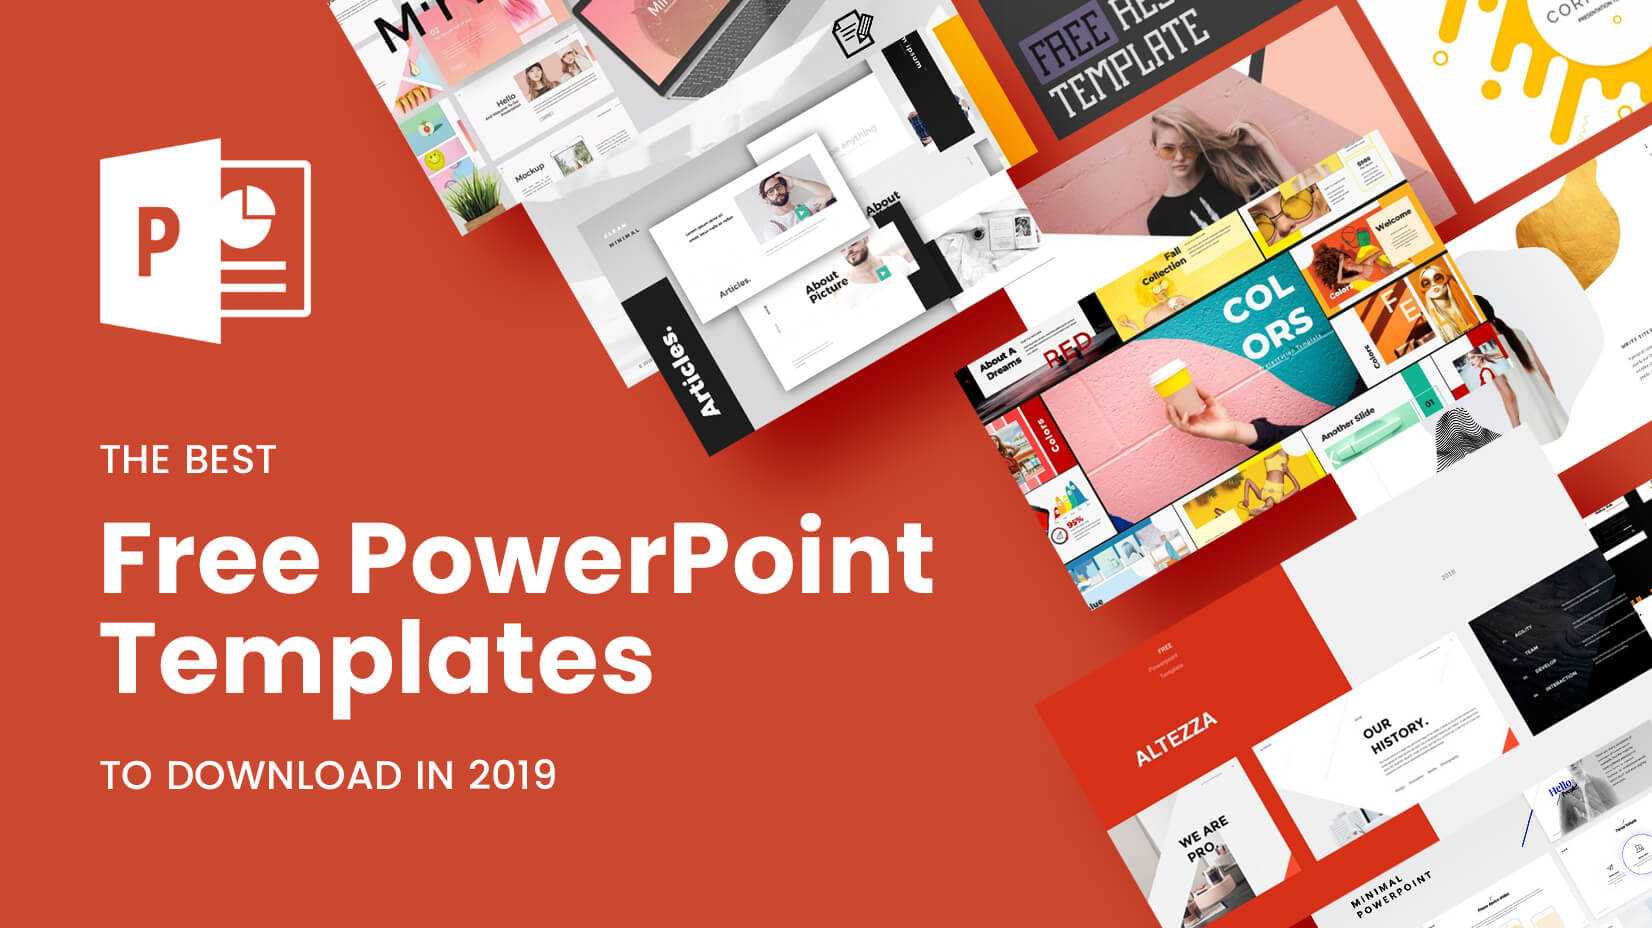 The Best Free Powerpoint Templates To Download In 2019 With Powerpoint Slides Design Templates For Free